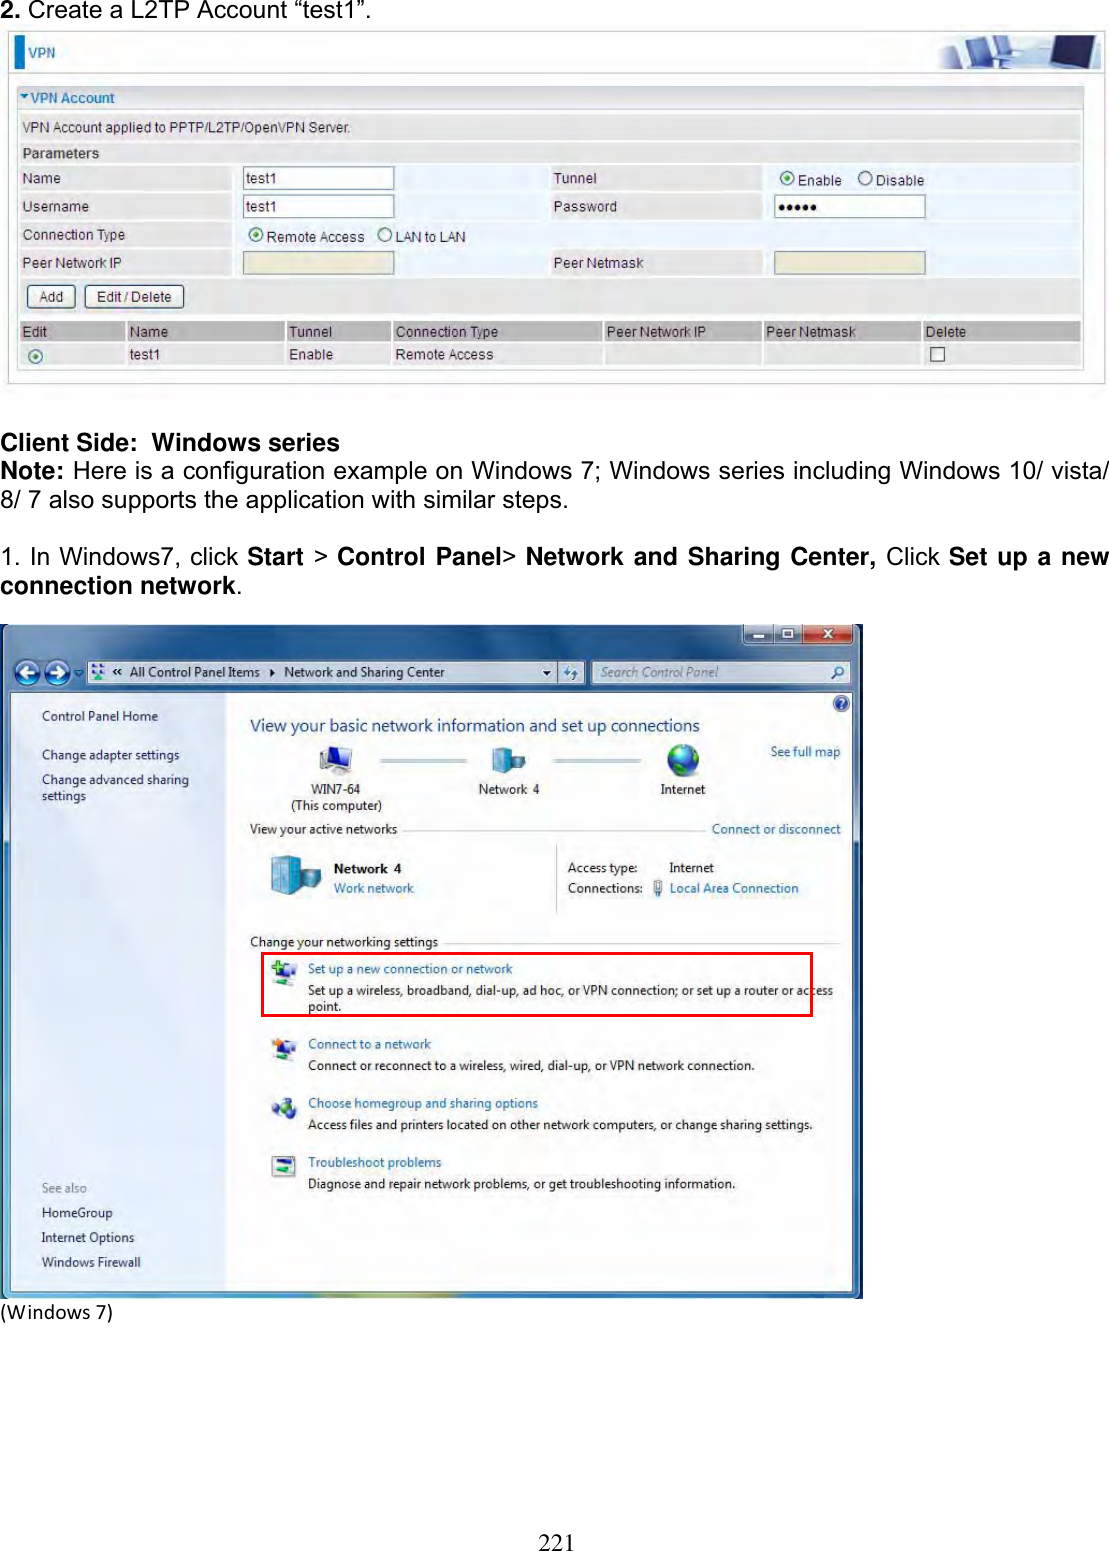 2212. Create a L2TP Account “test1”. Client Side:  Windows series Note: Here is a configuration example on Windows 7; Windows series including Windows 10/ vista/ 8/ 7 also supports the application with similar steps.1. In Windows7, click Start &gt;Control Panel&gt;Network and Sharing Center, Click Set up a new connection network.(Windows7)